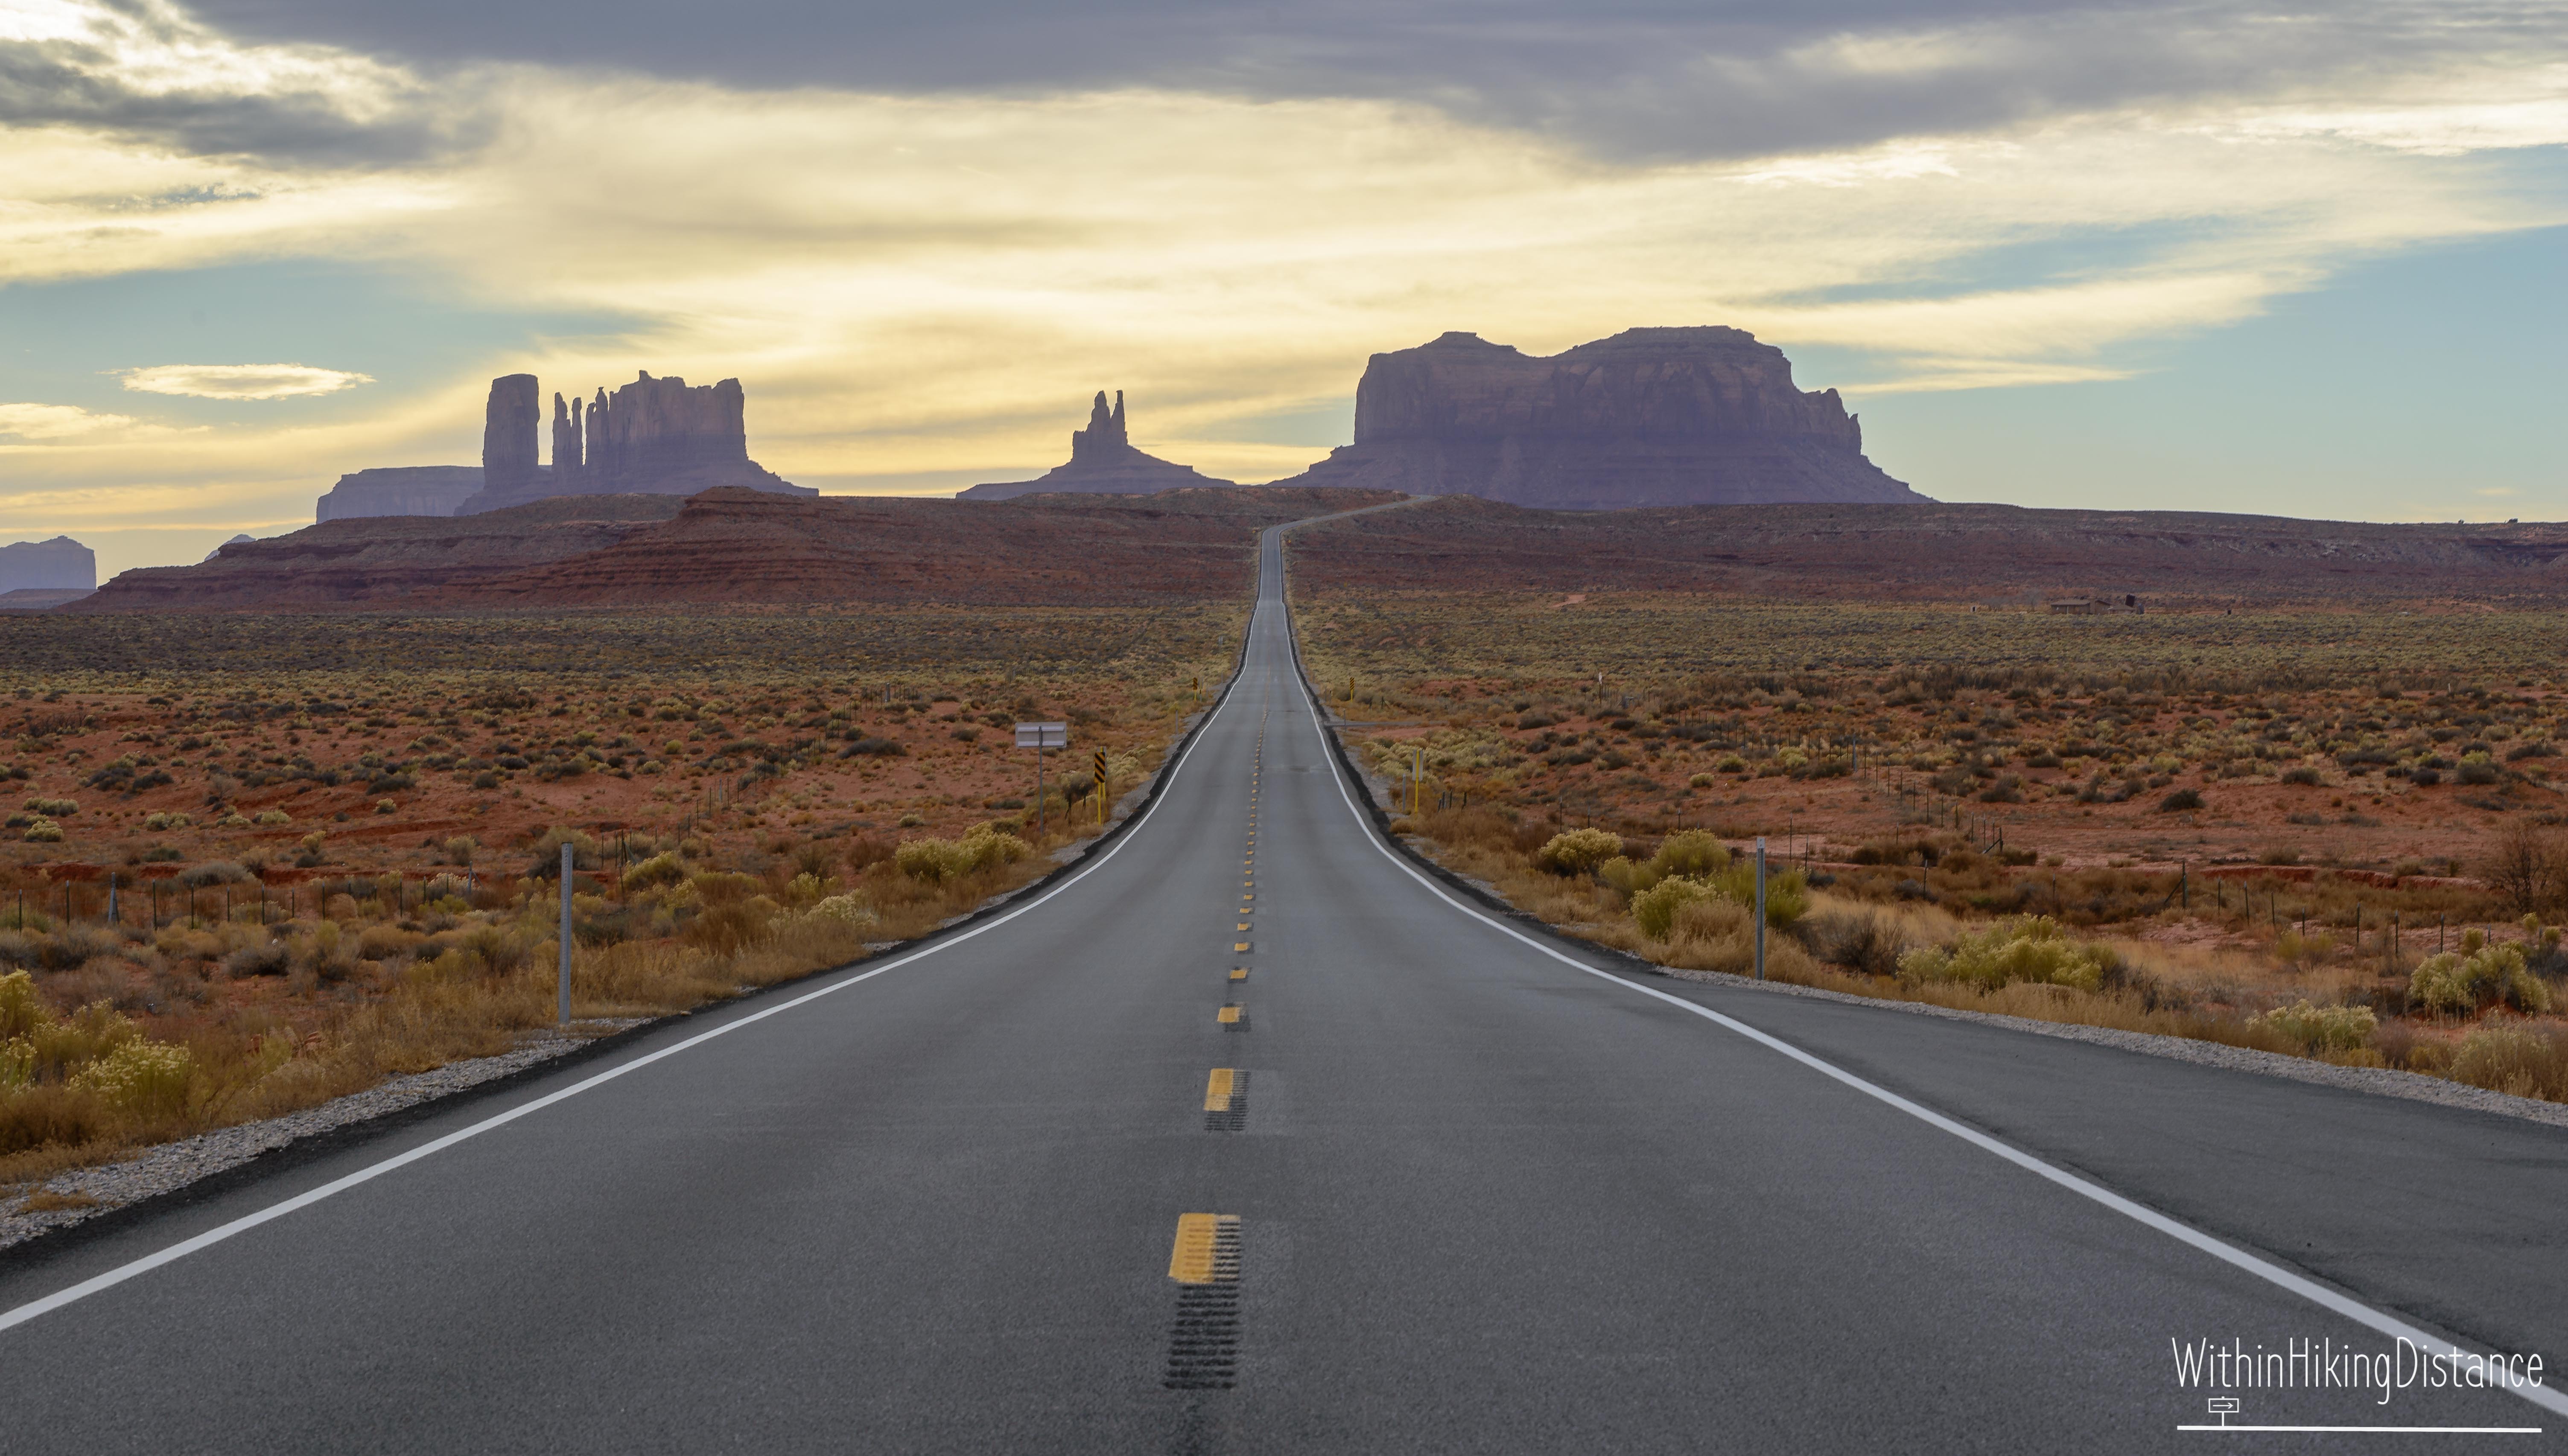 18 things we learned from going on a road trip (on a budget)